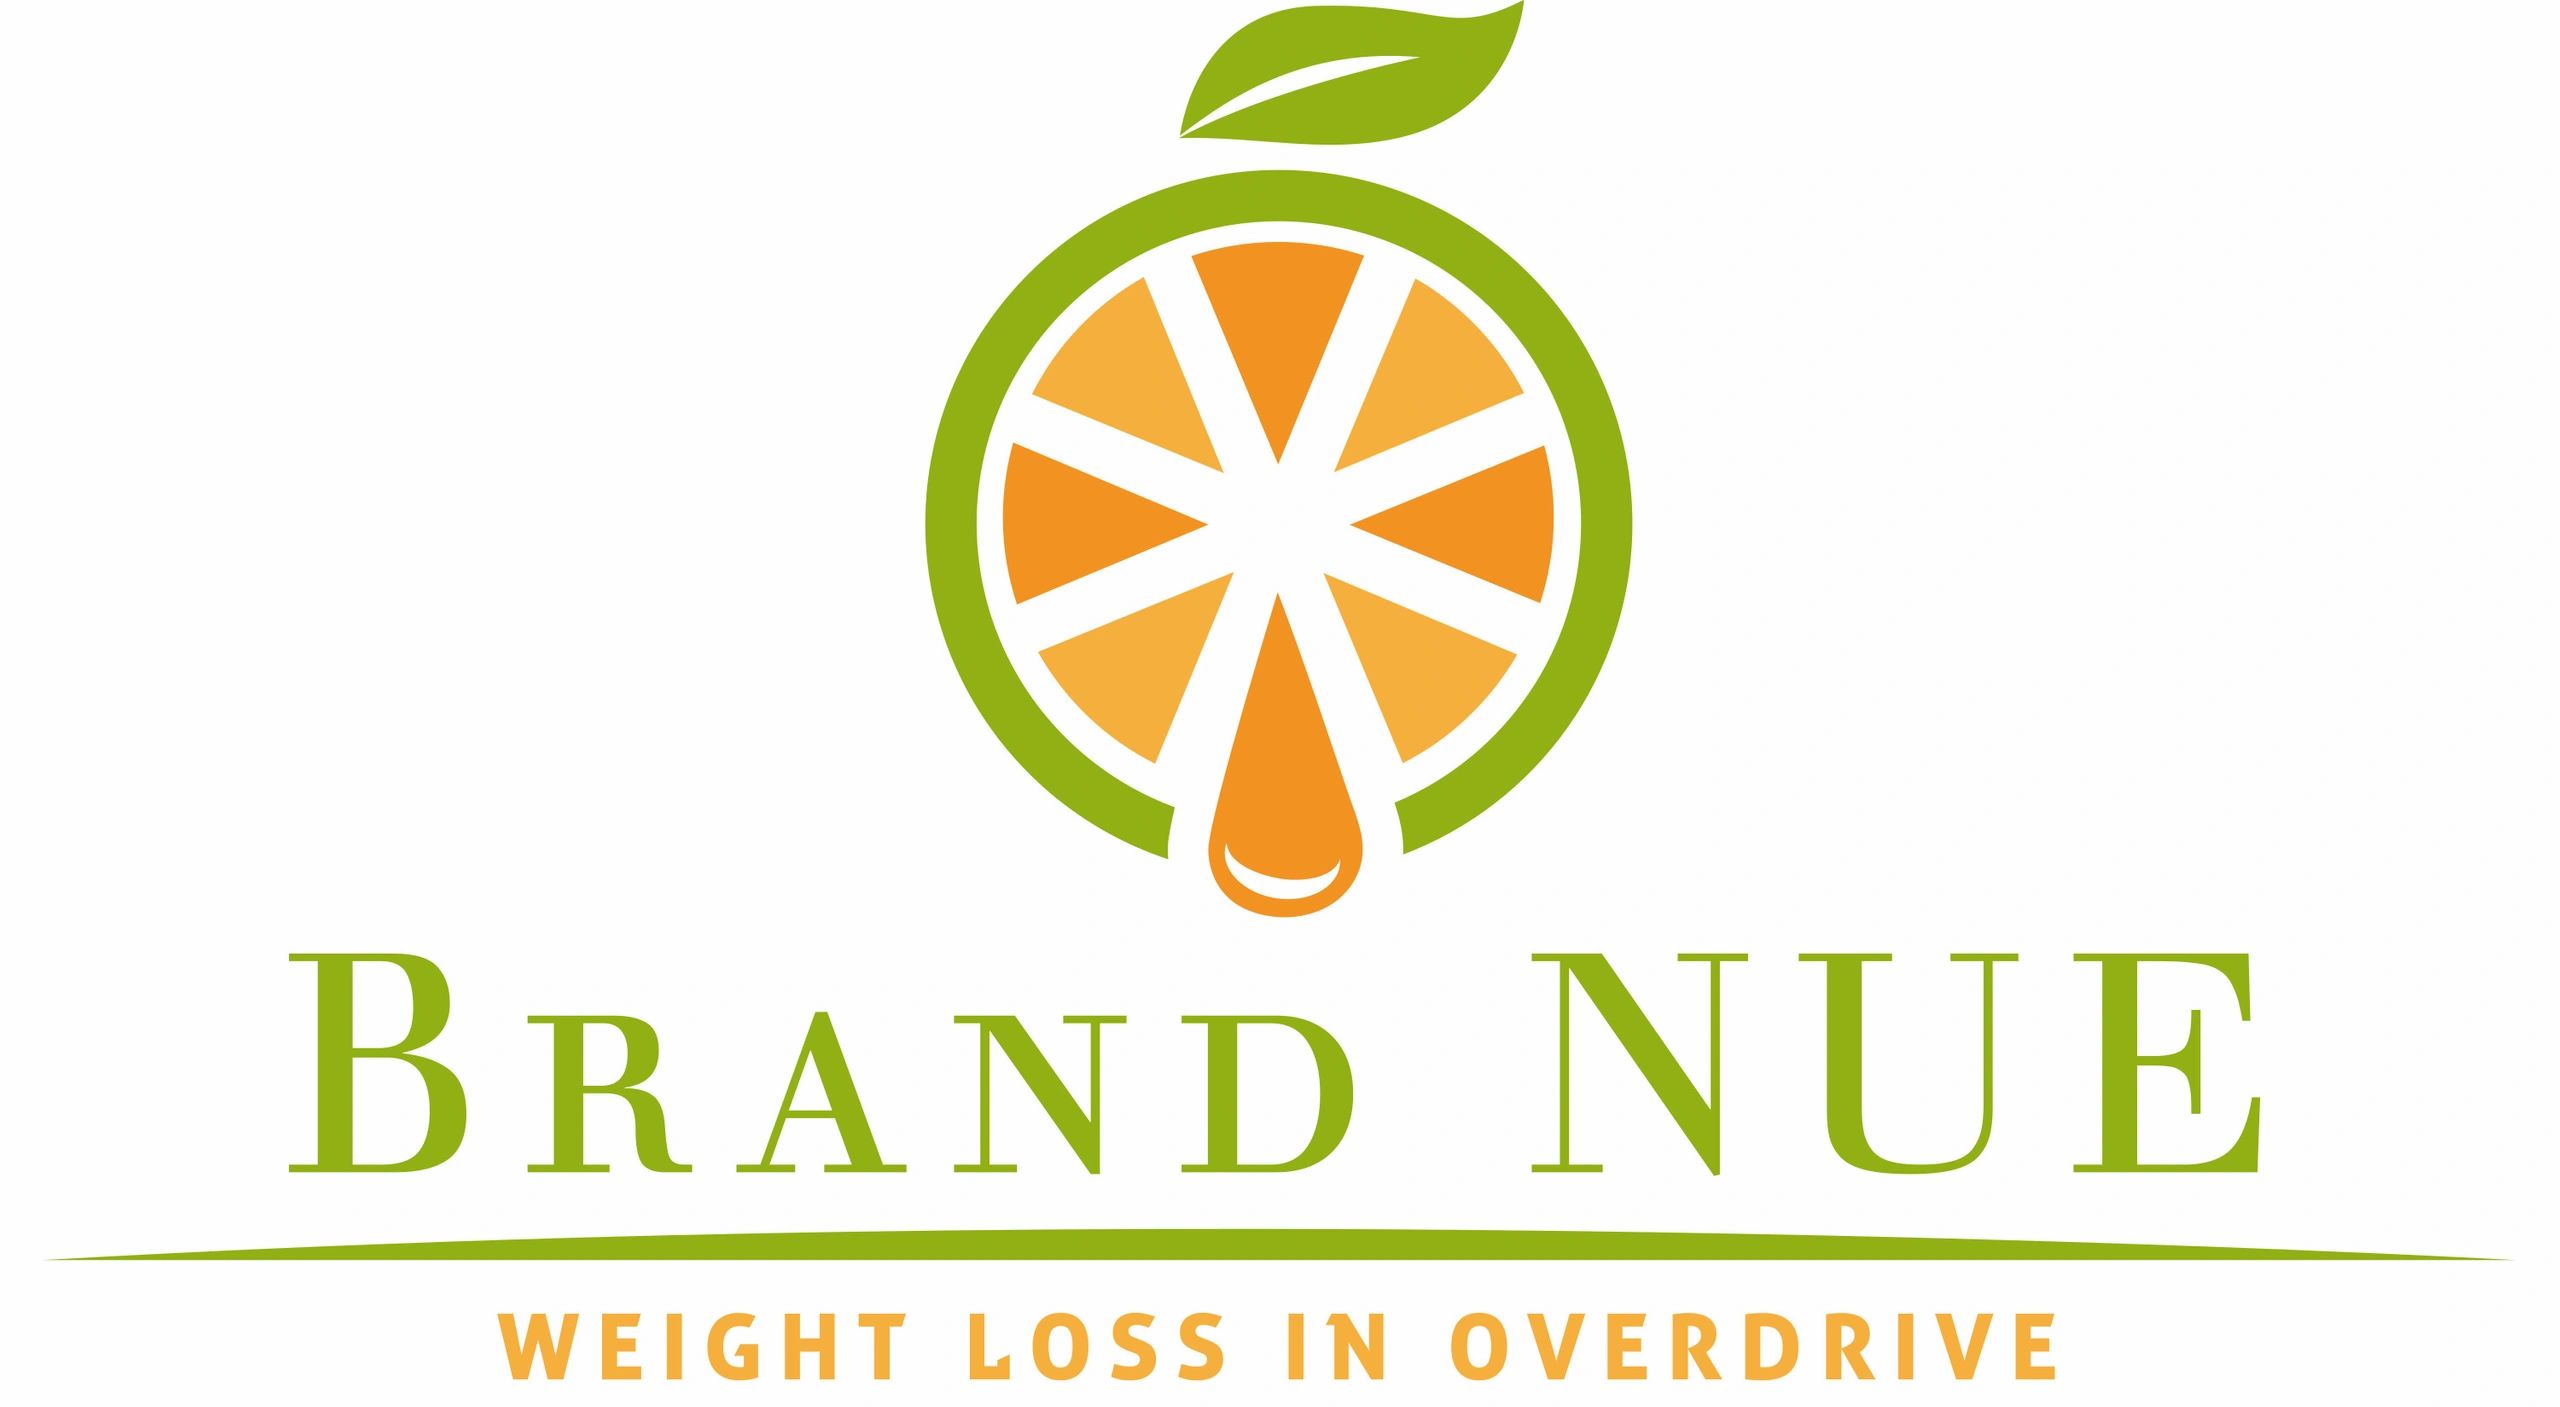 Brand NUE Weight loss